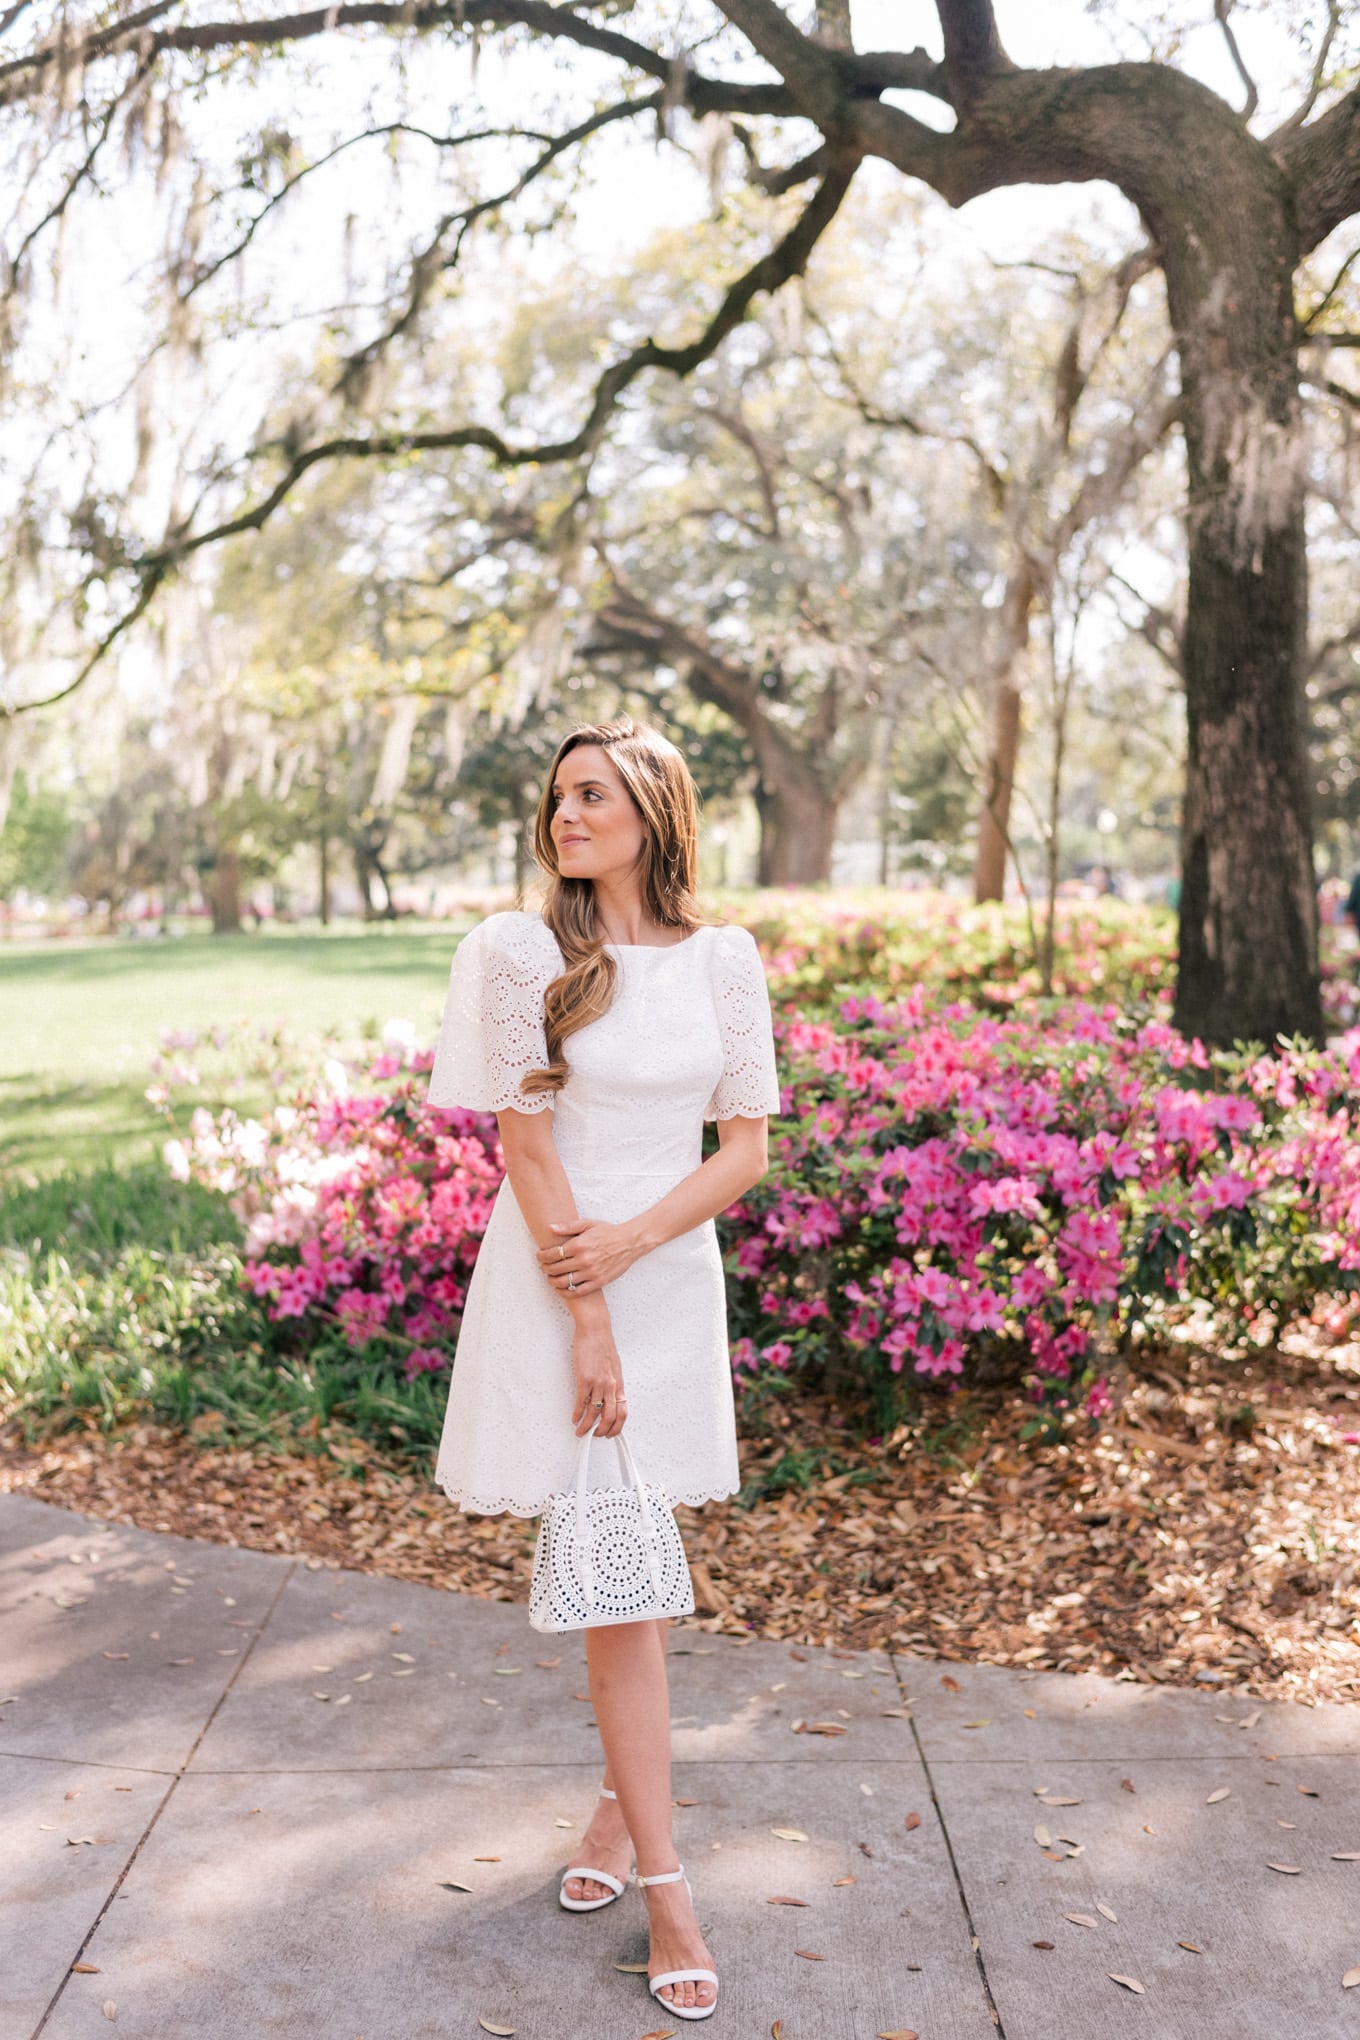 36 Chic White Eyelet Dresses And Ideas On How To Style Them